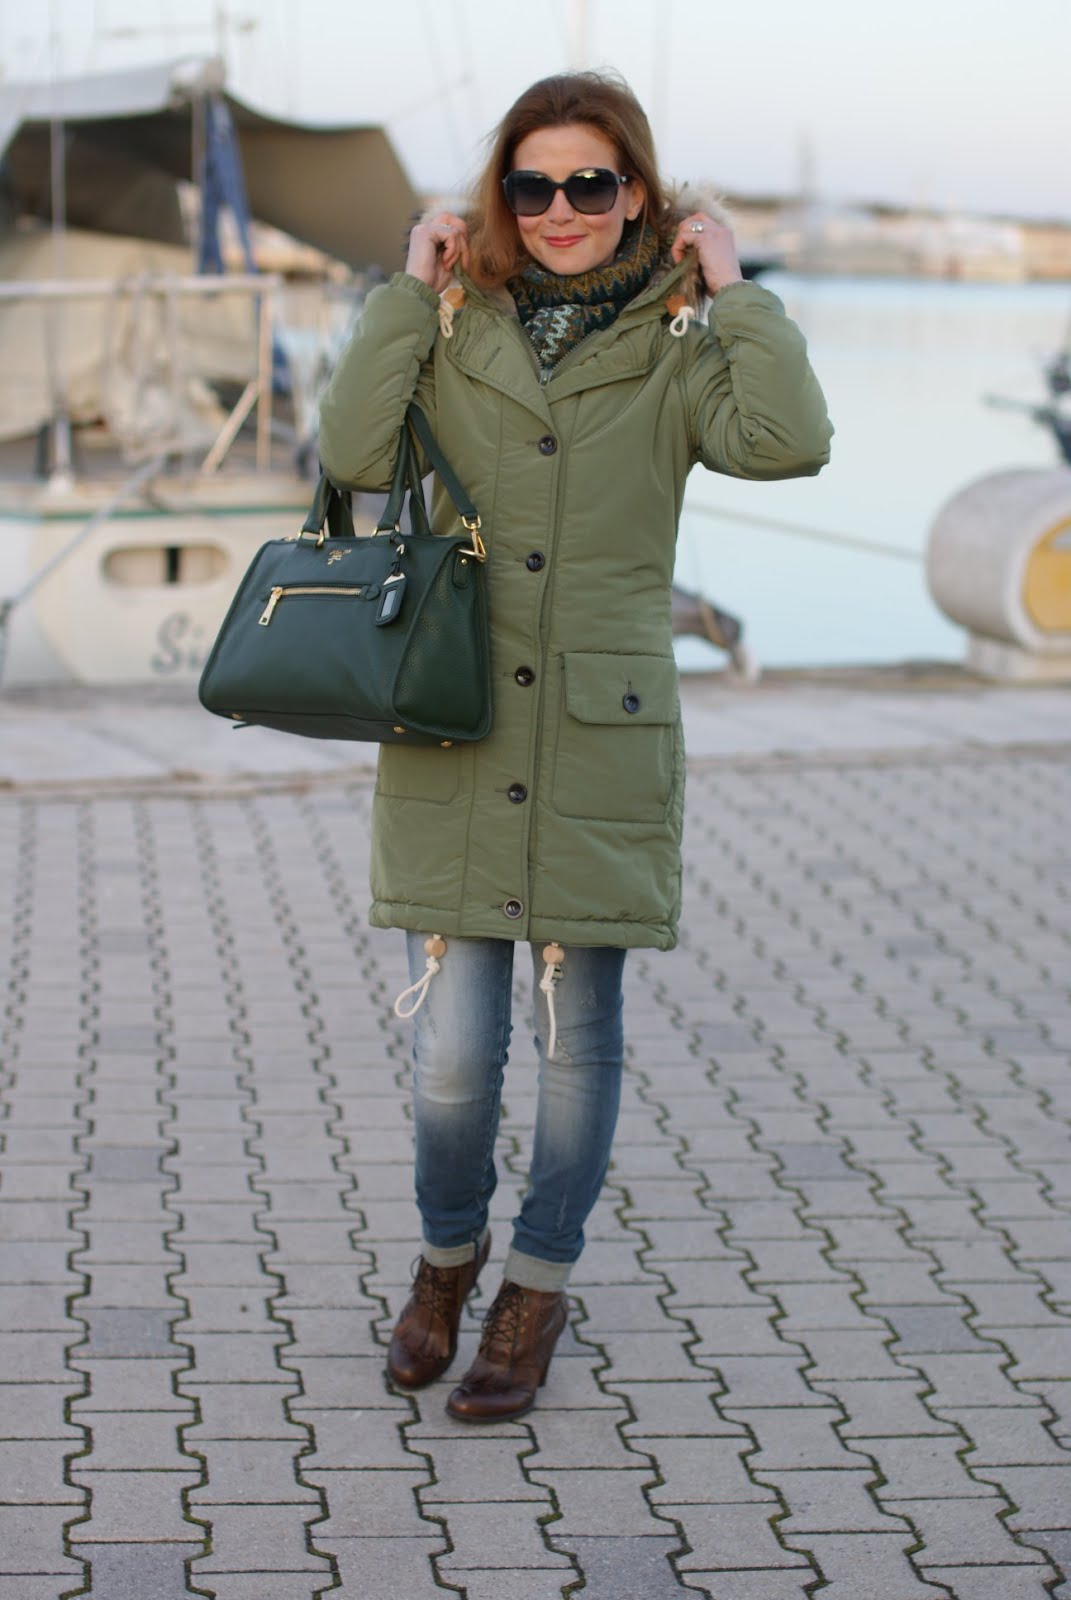 Trendy and warm: my Parka jacket ! | Fashion and Cookies - fashion and ...